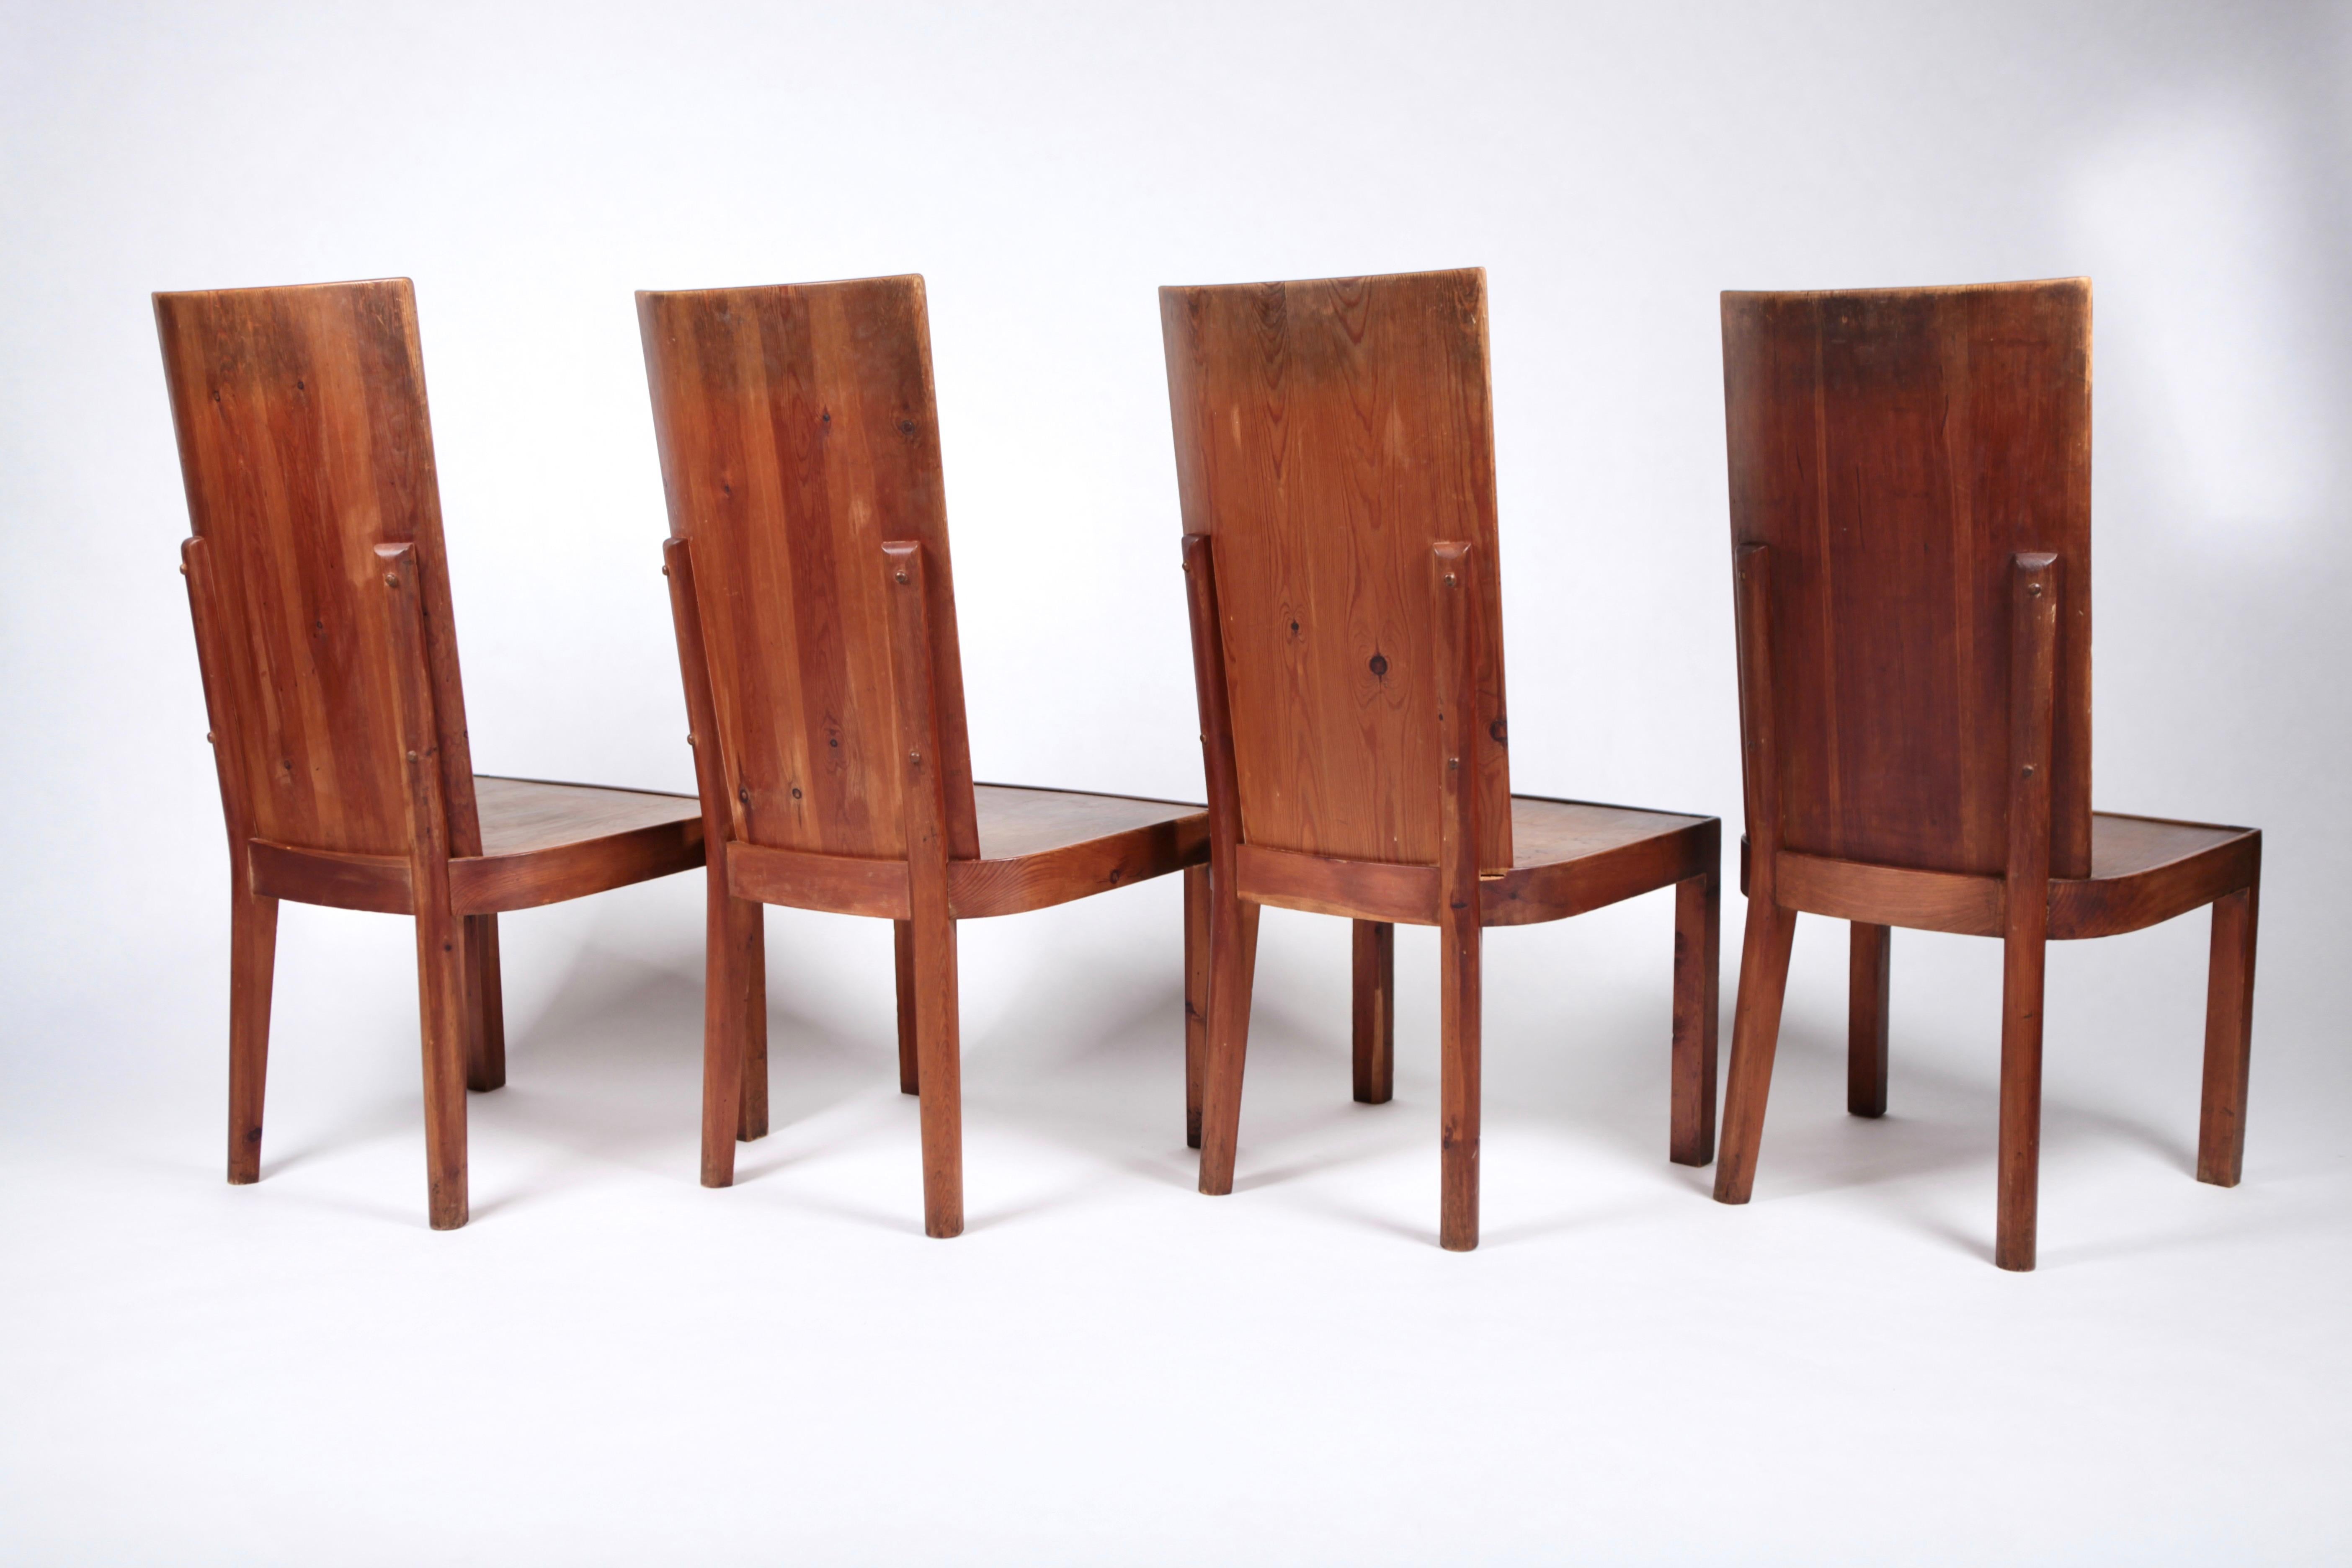 Set of 4 dining chairs in acid stained pine, attributed to Axel Einar Hjorth, model Lovö, Sweden 1930s.